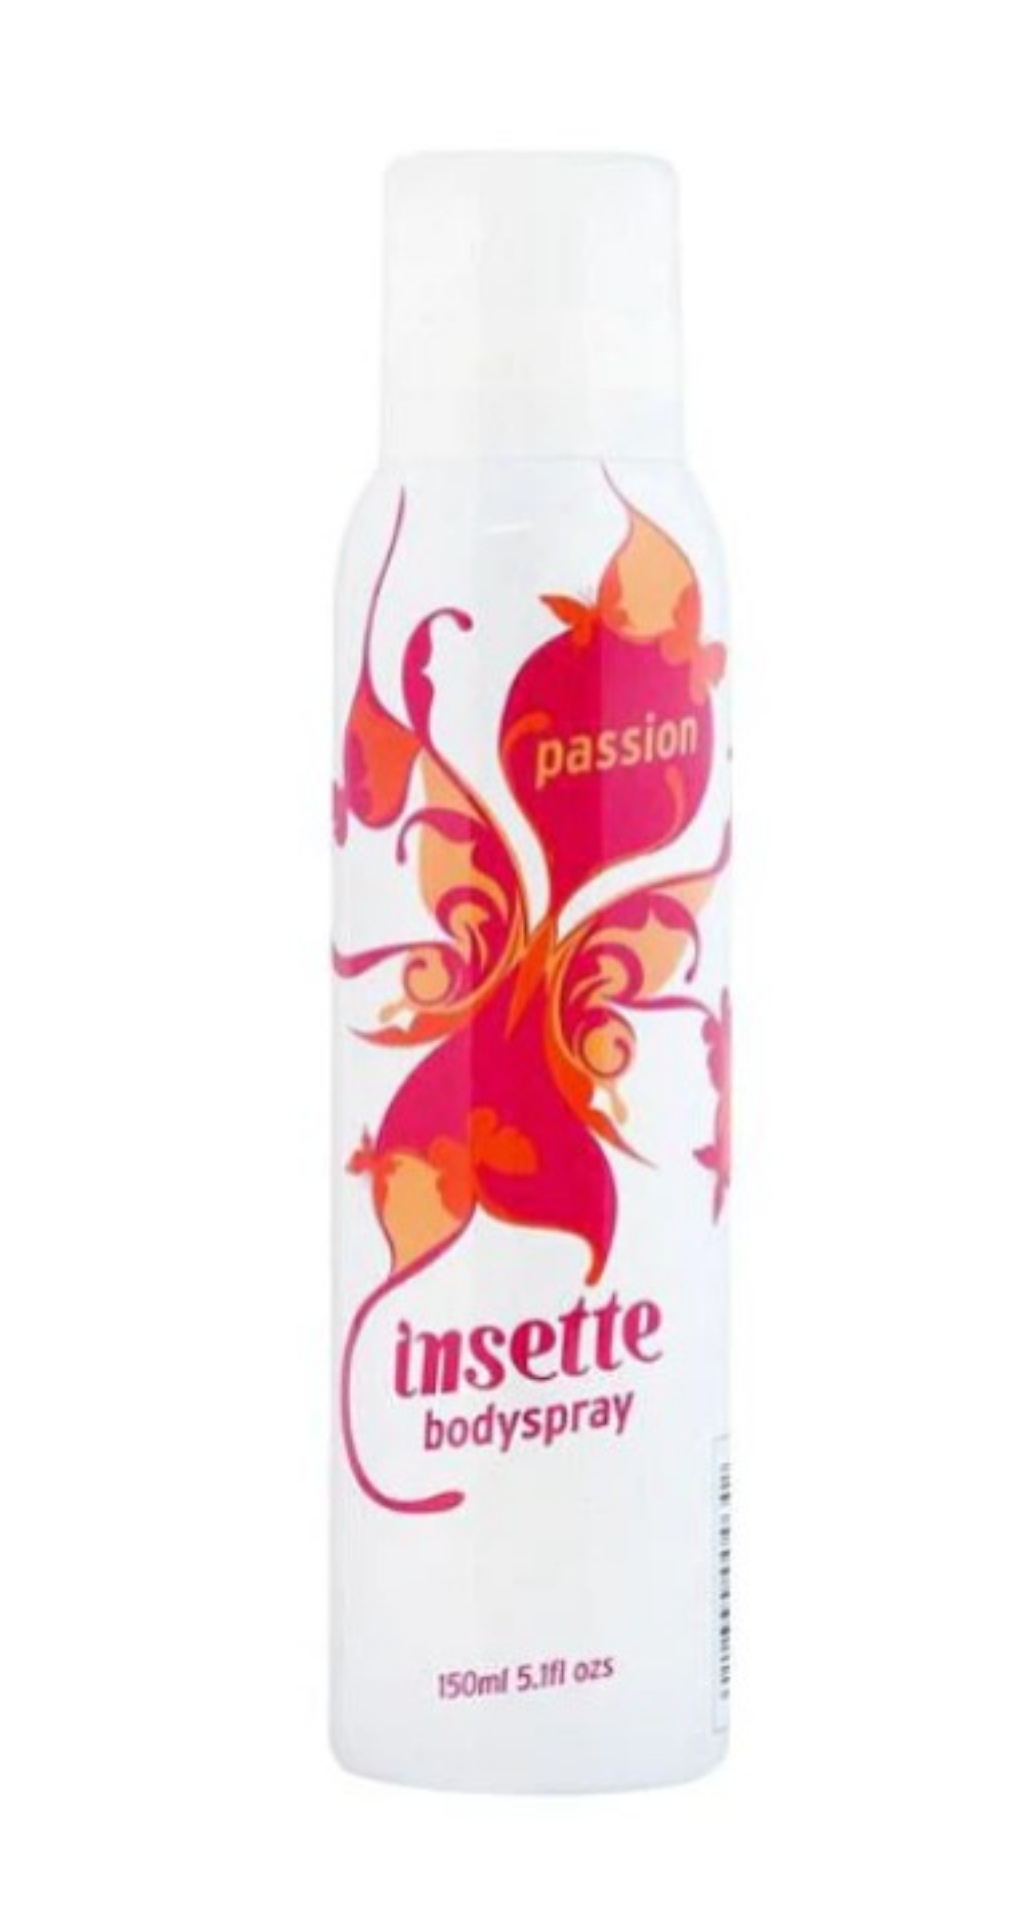 Picture of INSETTE LADIES BODYSPRAY - PASSION